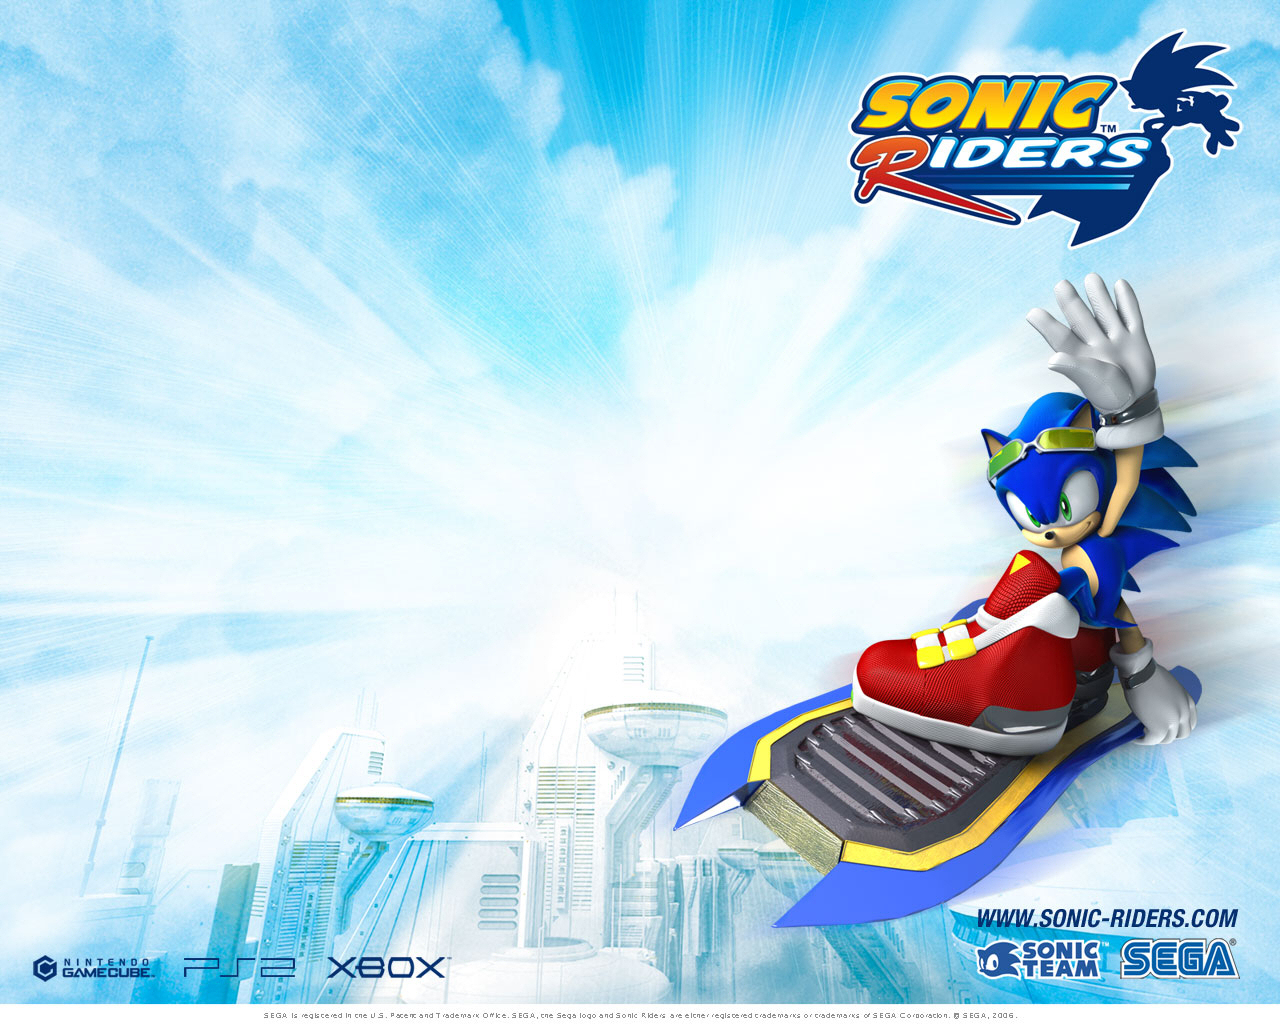 Wallpapers – Sonic Riders | Last Minute Continue1280 x 1024